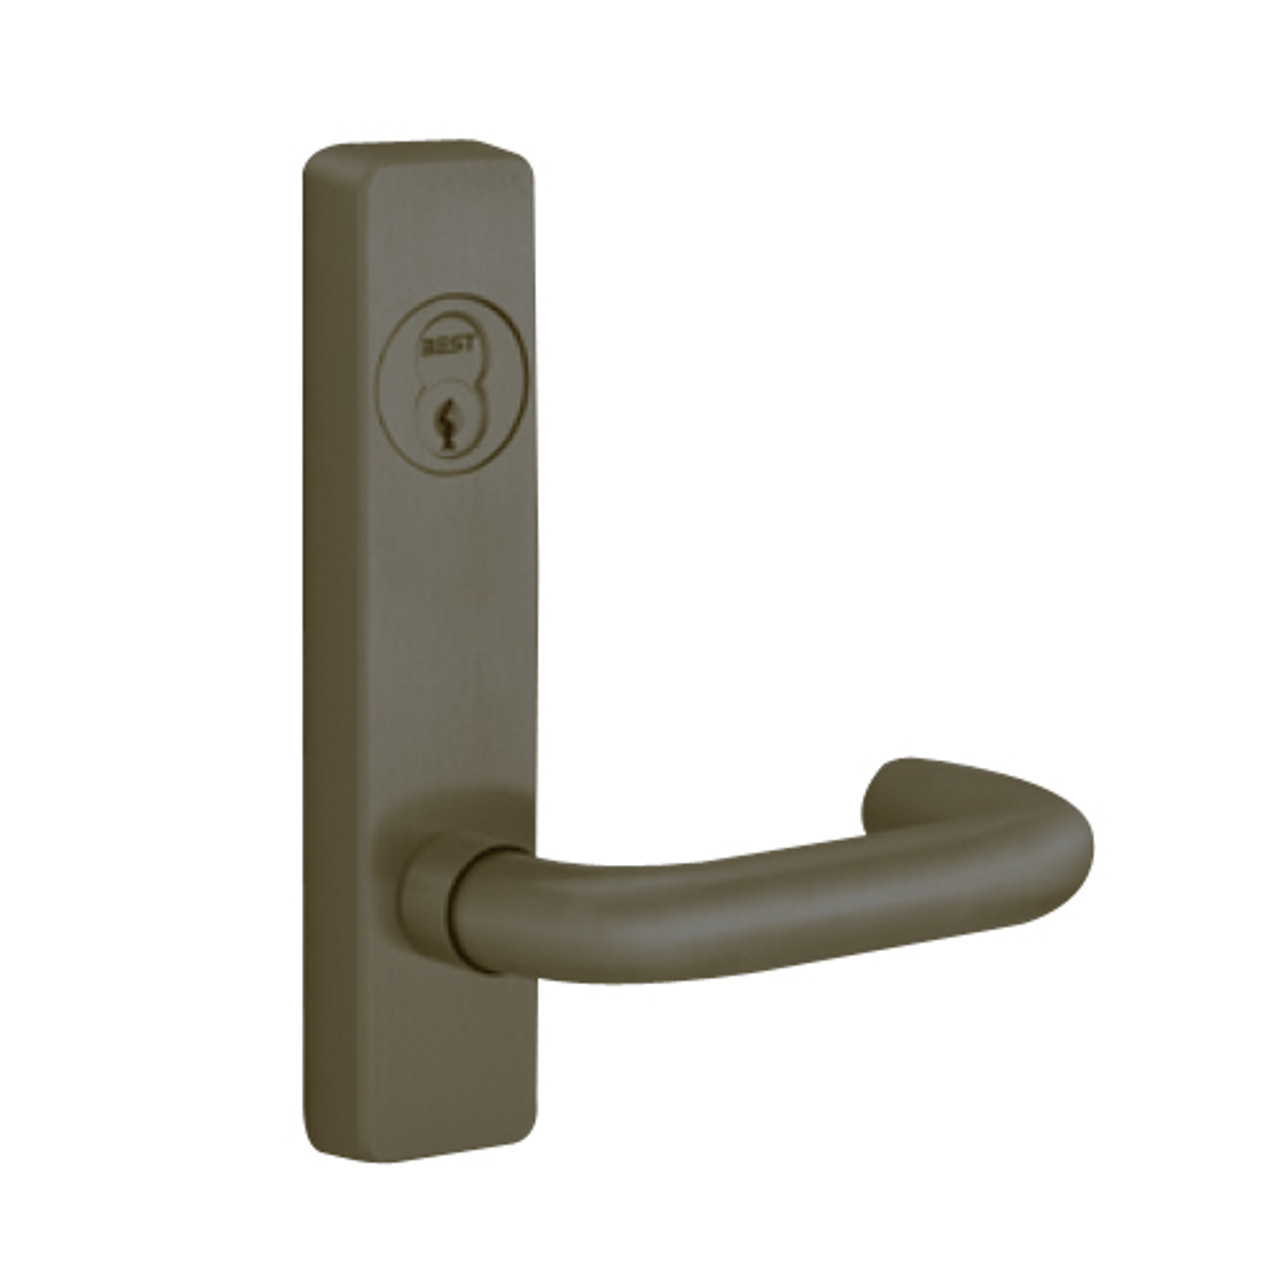 2914C-613-LHR PHI Lever Always Active with C Lever Design for Apex Series Narrow Stile Door Exit Device in Oil Rubbed Bronze Finish